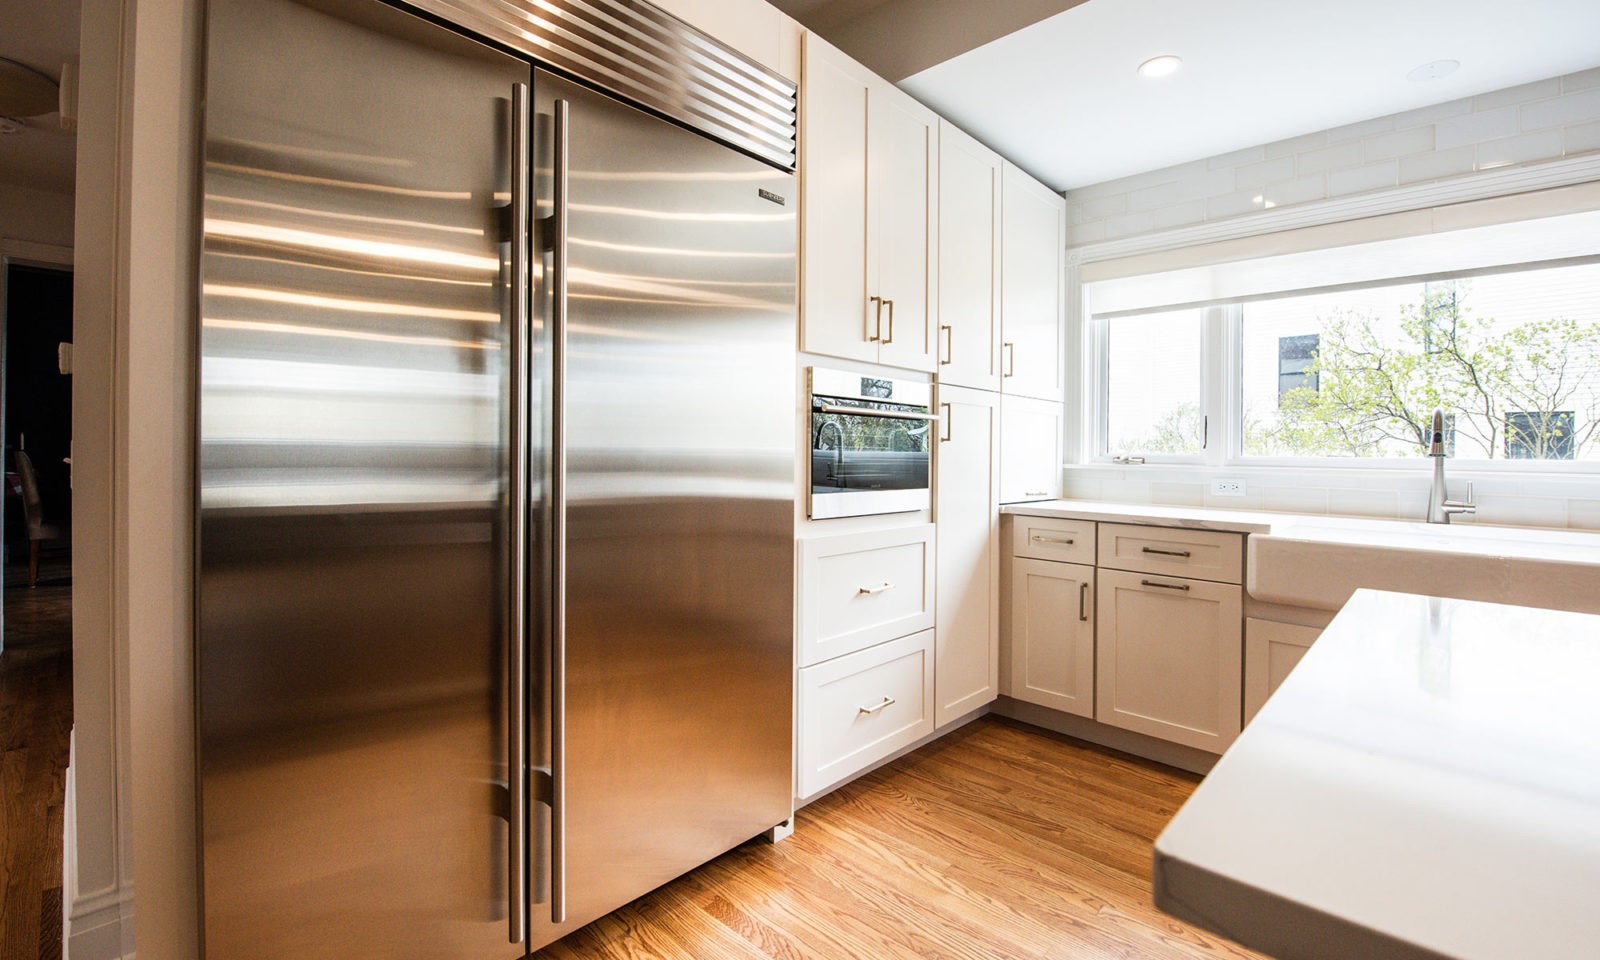 Stainless steel fridge next to cream cabinets in newly renovated kitchen